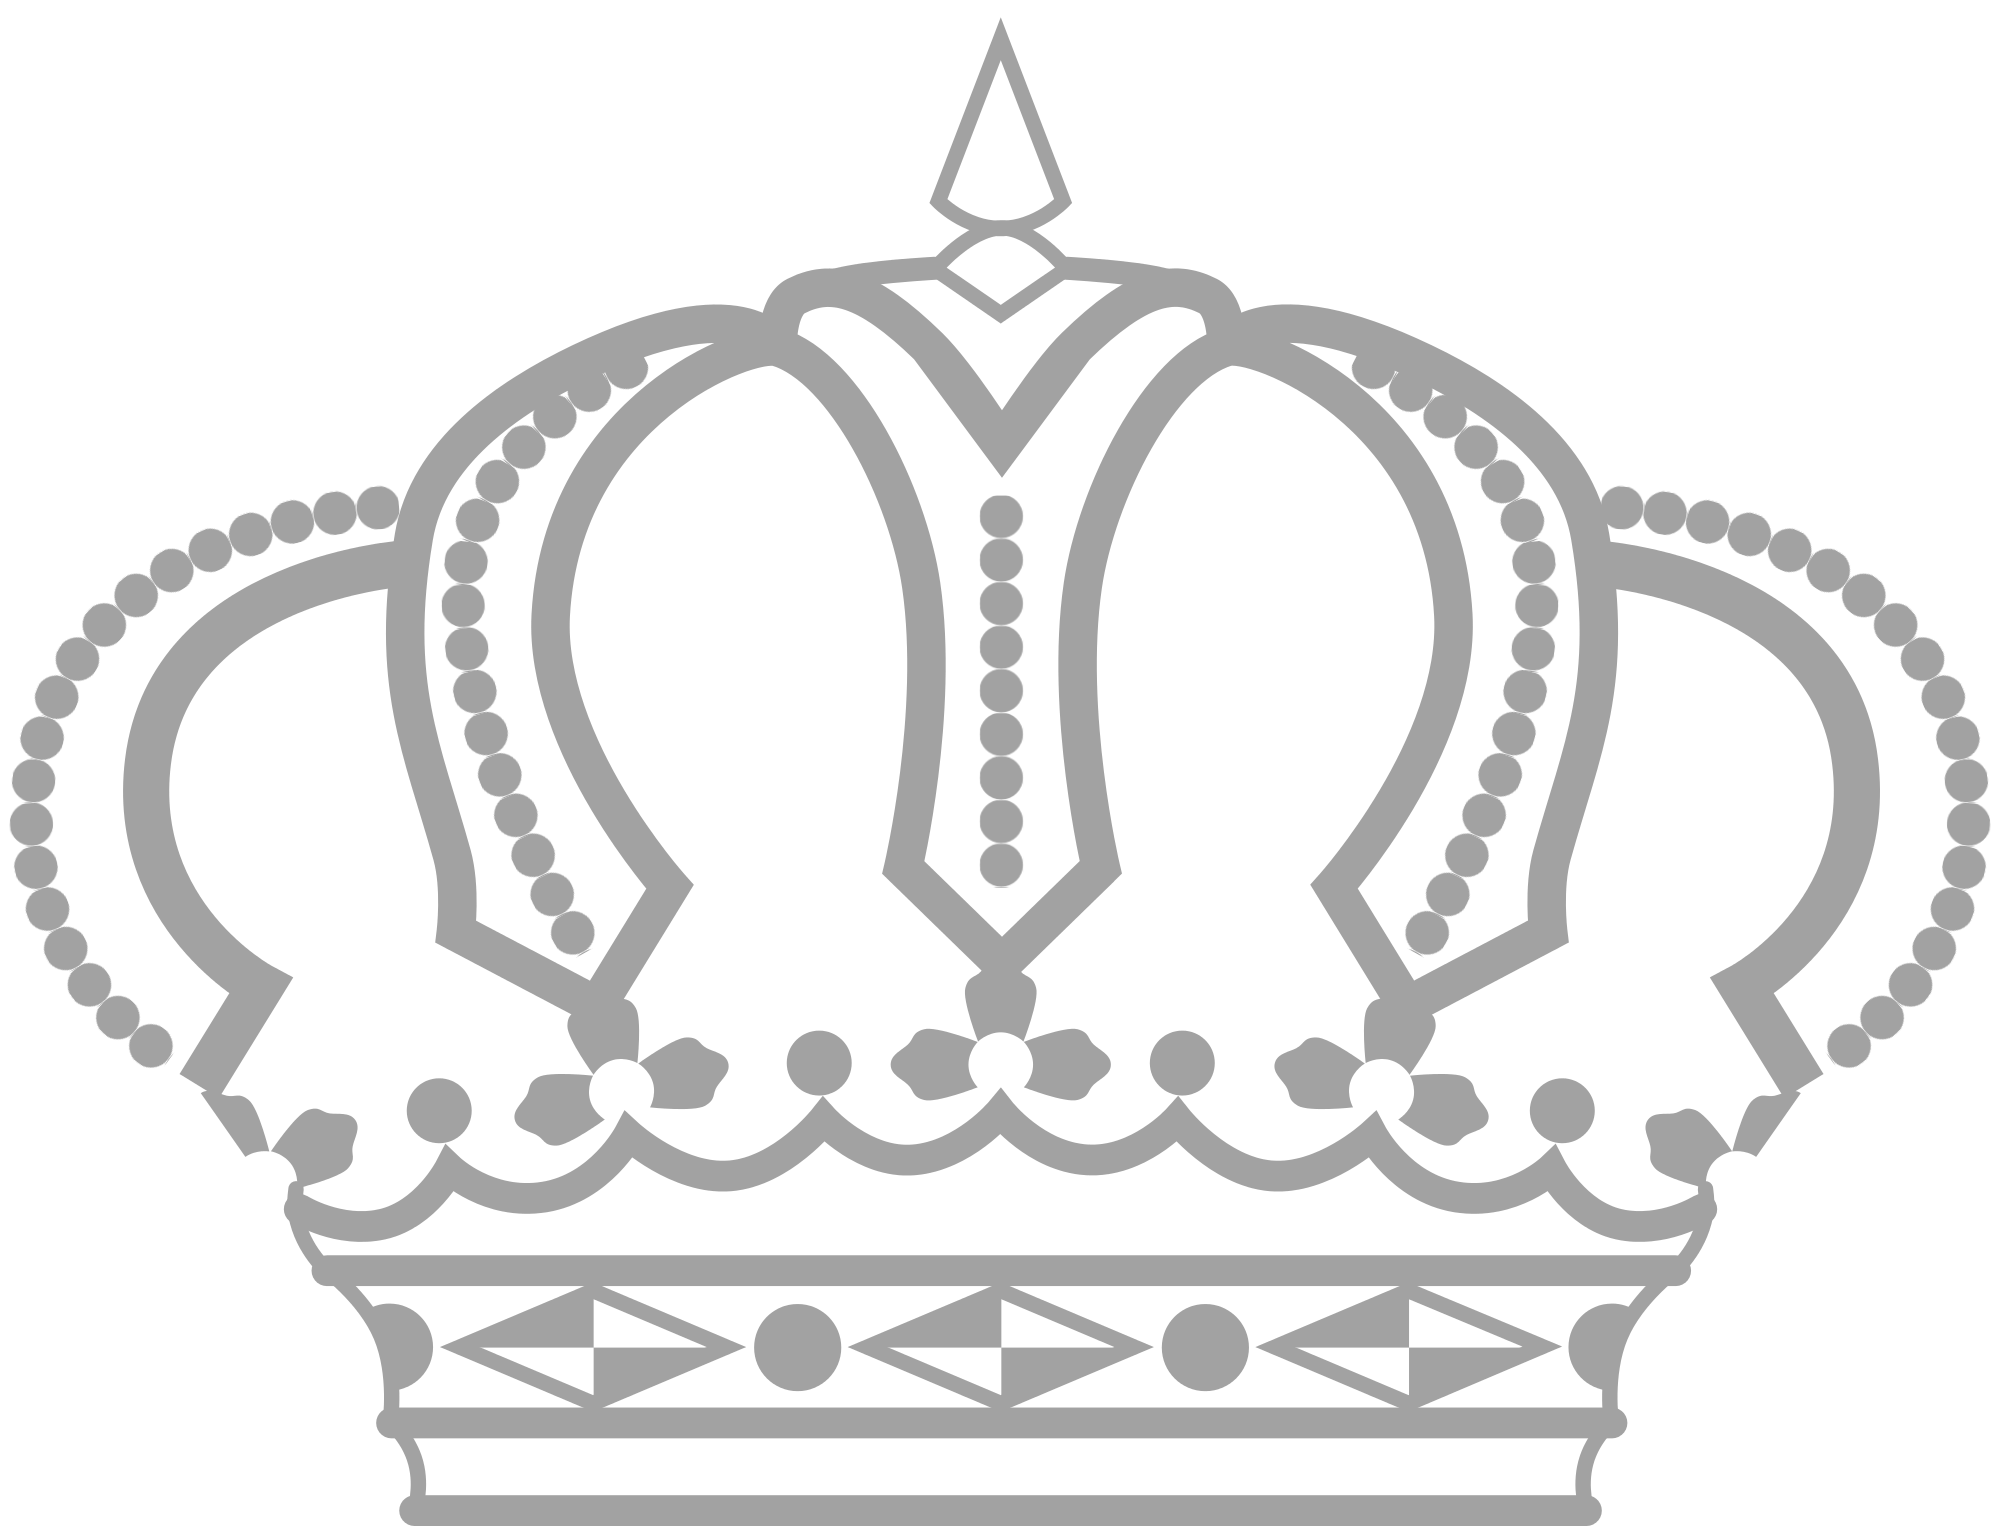 Crown clipart prince, Crown prince Transparent FREE for ...